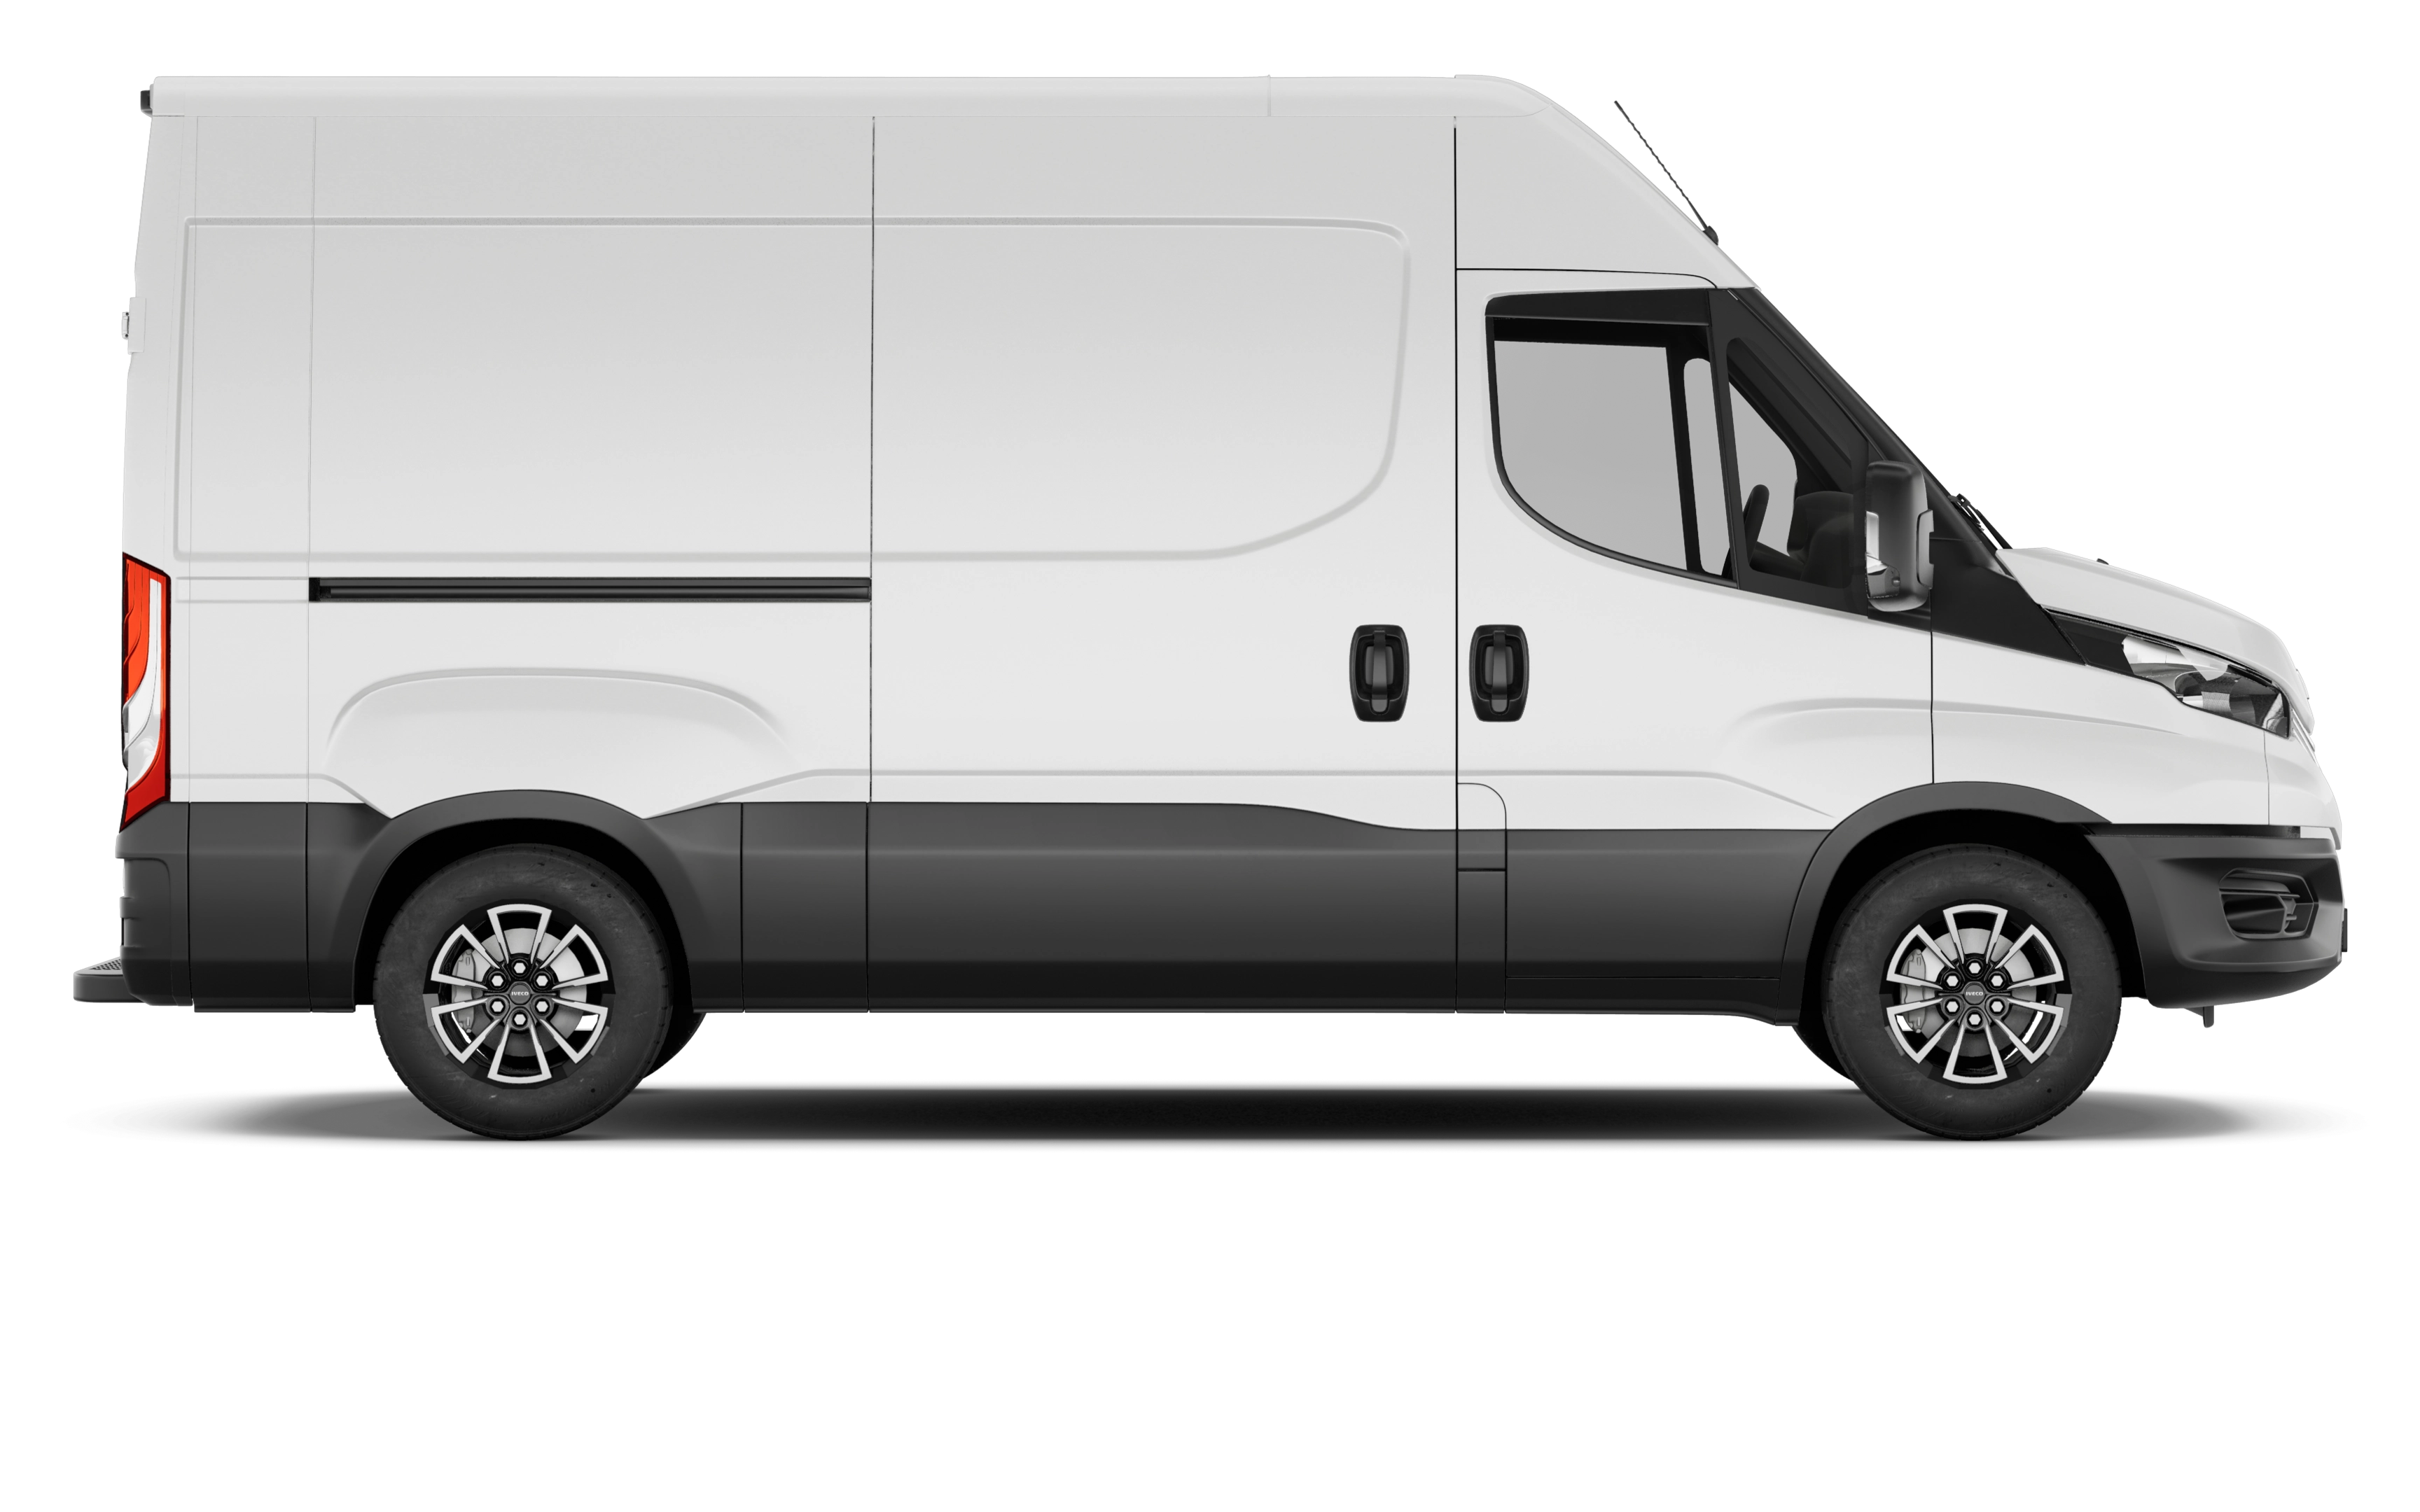 Iveco edaily 35s14 electric 140kw 74kwh extra high/rf van 4100 wb auto [22kw]